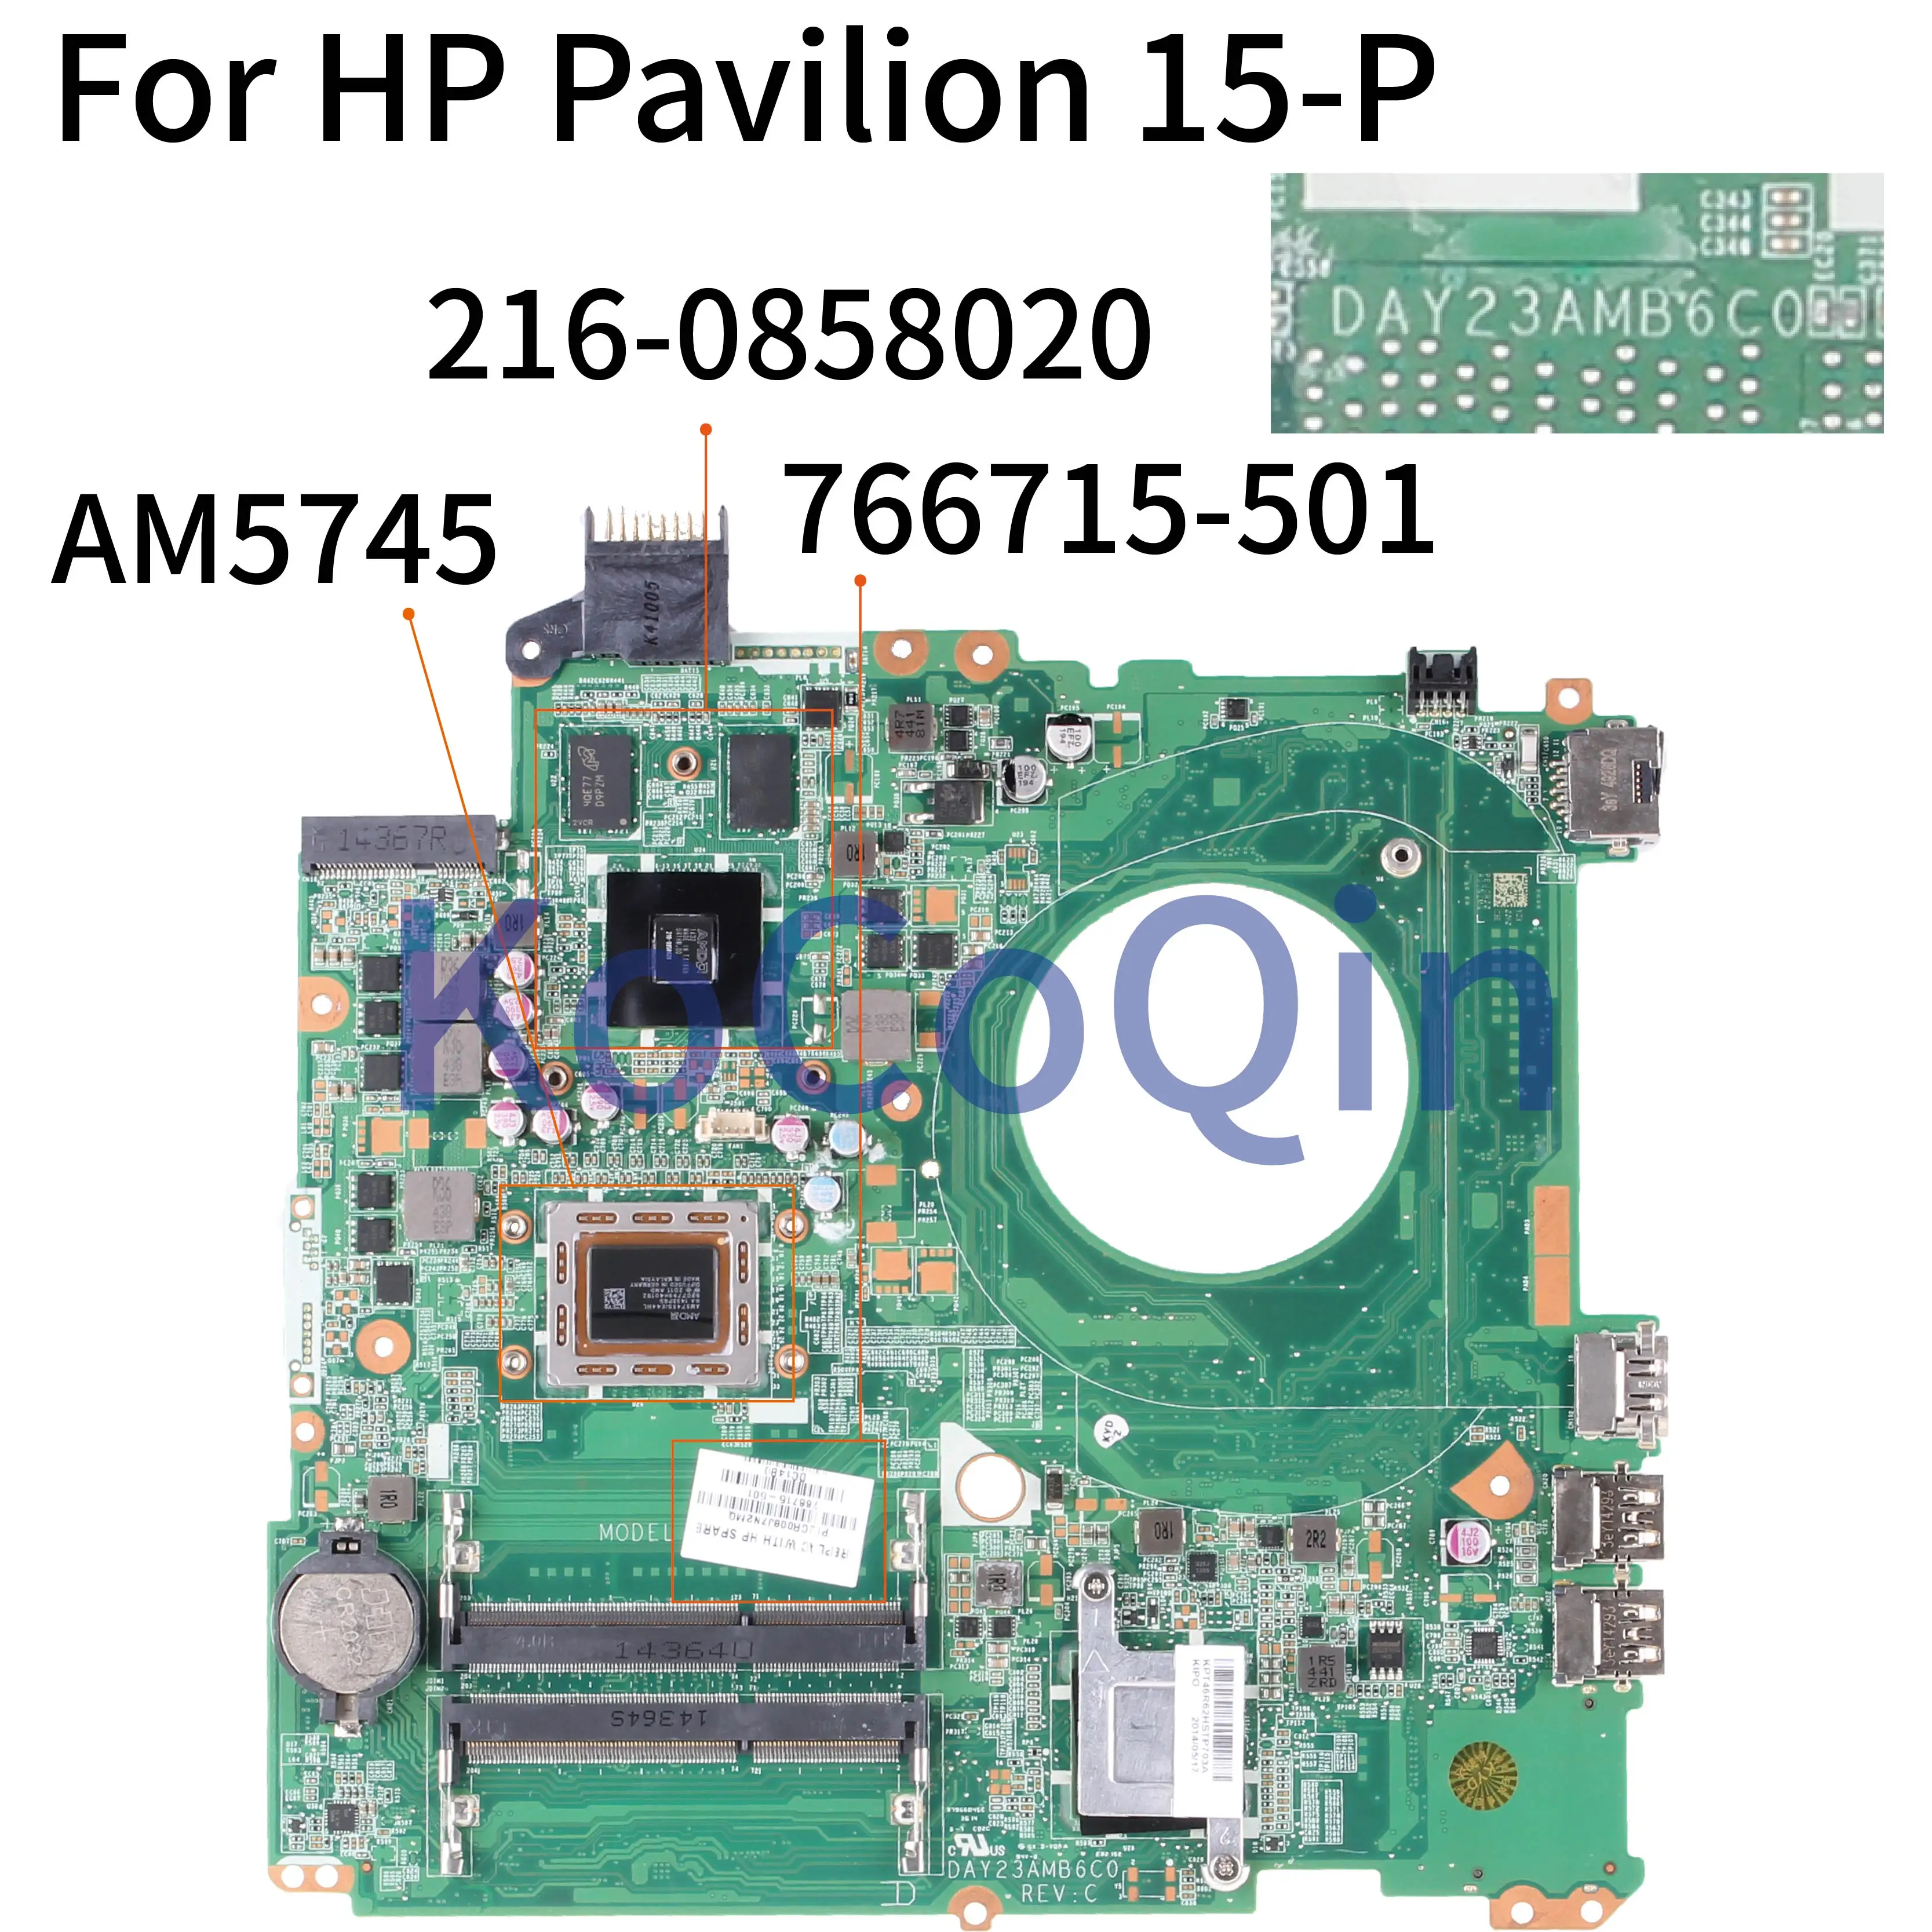 Hot Product  KoCoQin Laptop motherboard For HP Pavilion 15-P Series AM5745 216-0858020 Mainboard 766715-001 7667